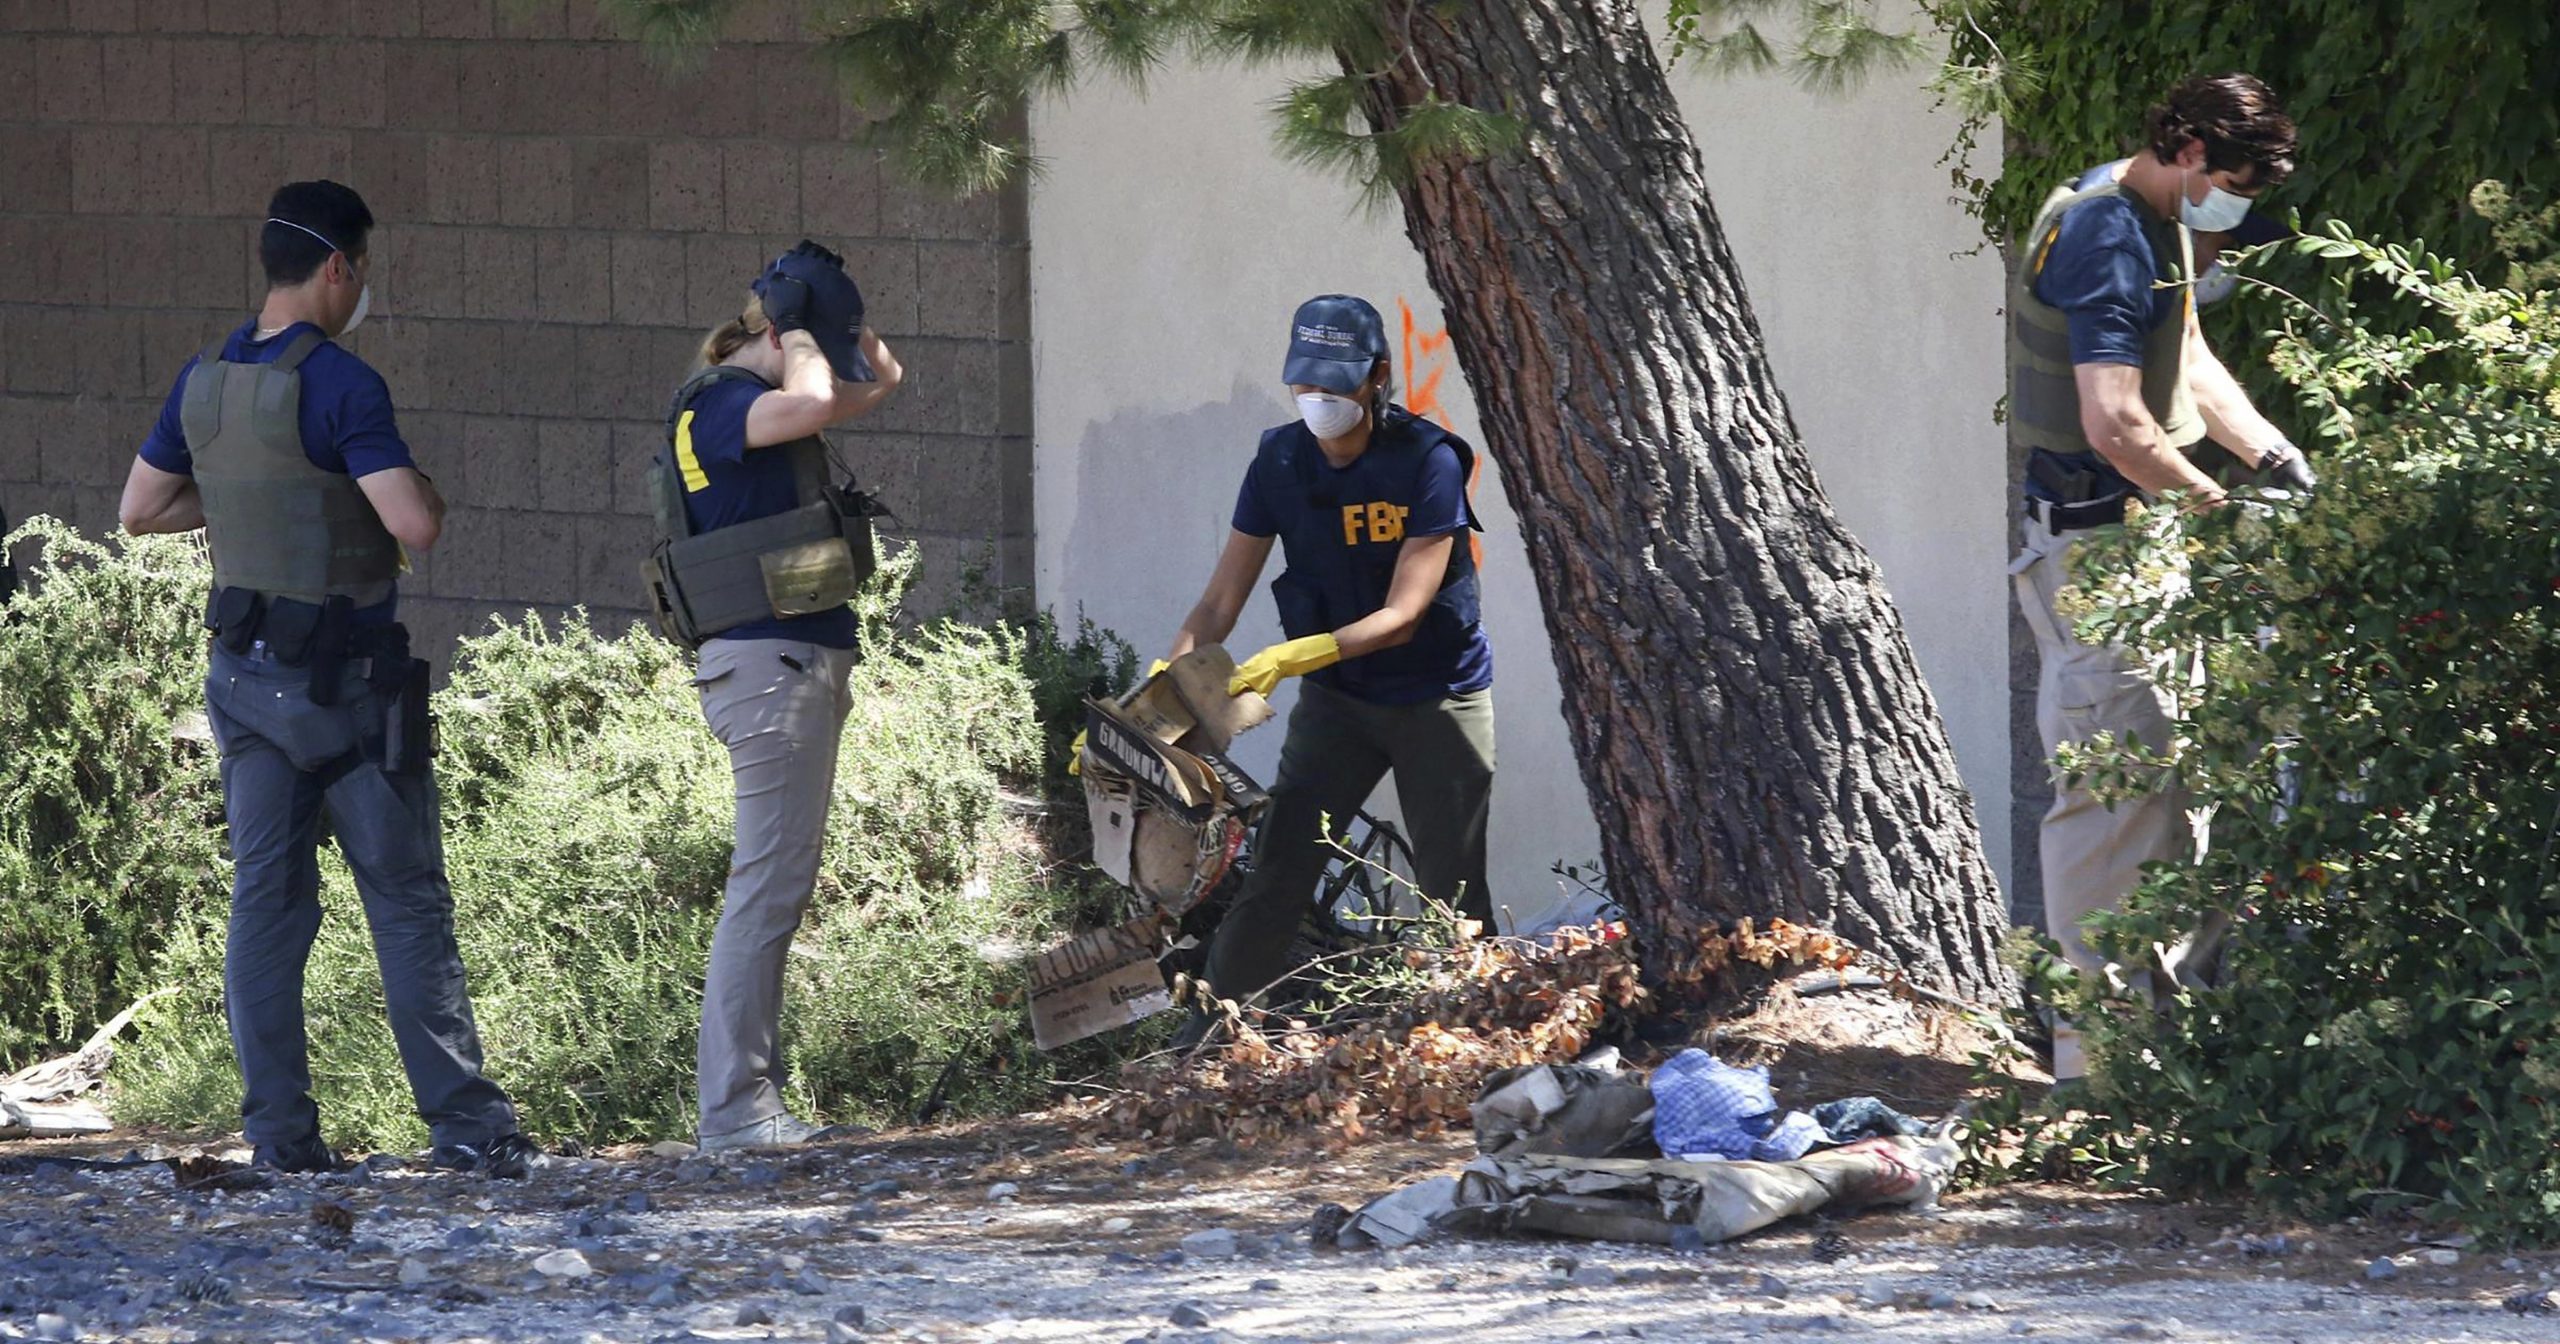 FBI agents examine an area in Paso Robles, California, on June 11, 2020, after the shooting of a sheriff's deputy early Wednesday. The gunman, 26-year-old Mason James Lira, was killed by police in a shootout on Thursday.